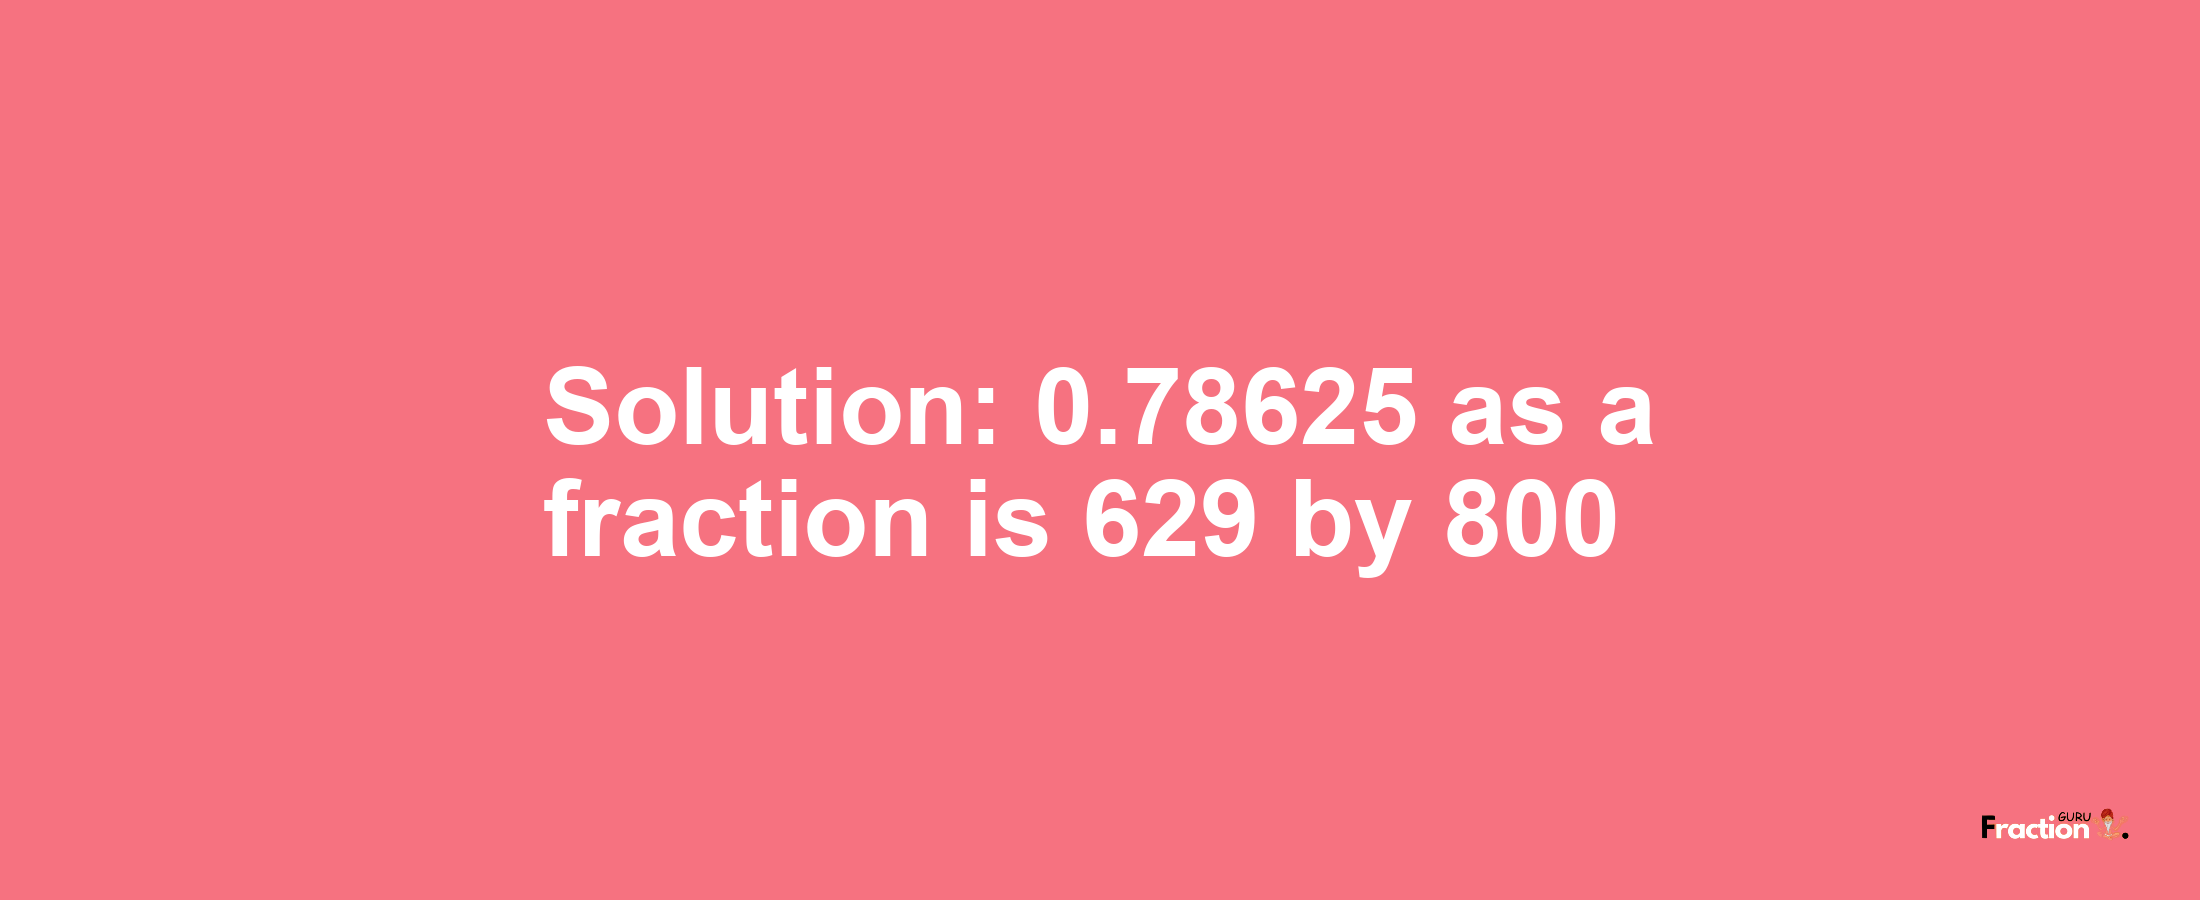 Solution:0.78625 as a fraction is 629/800